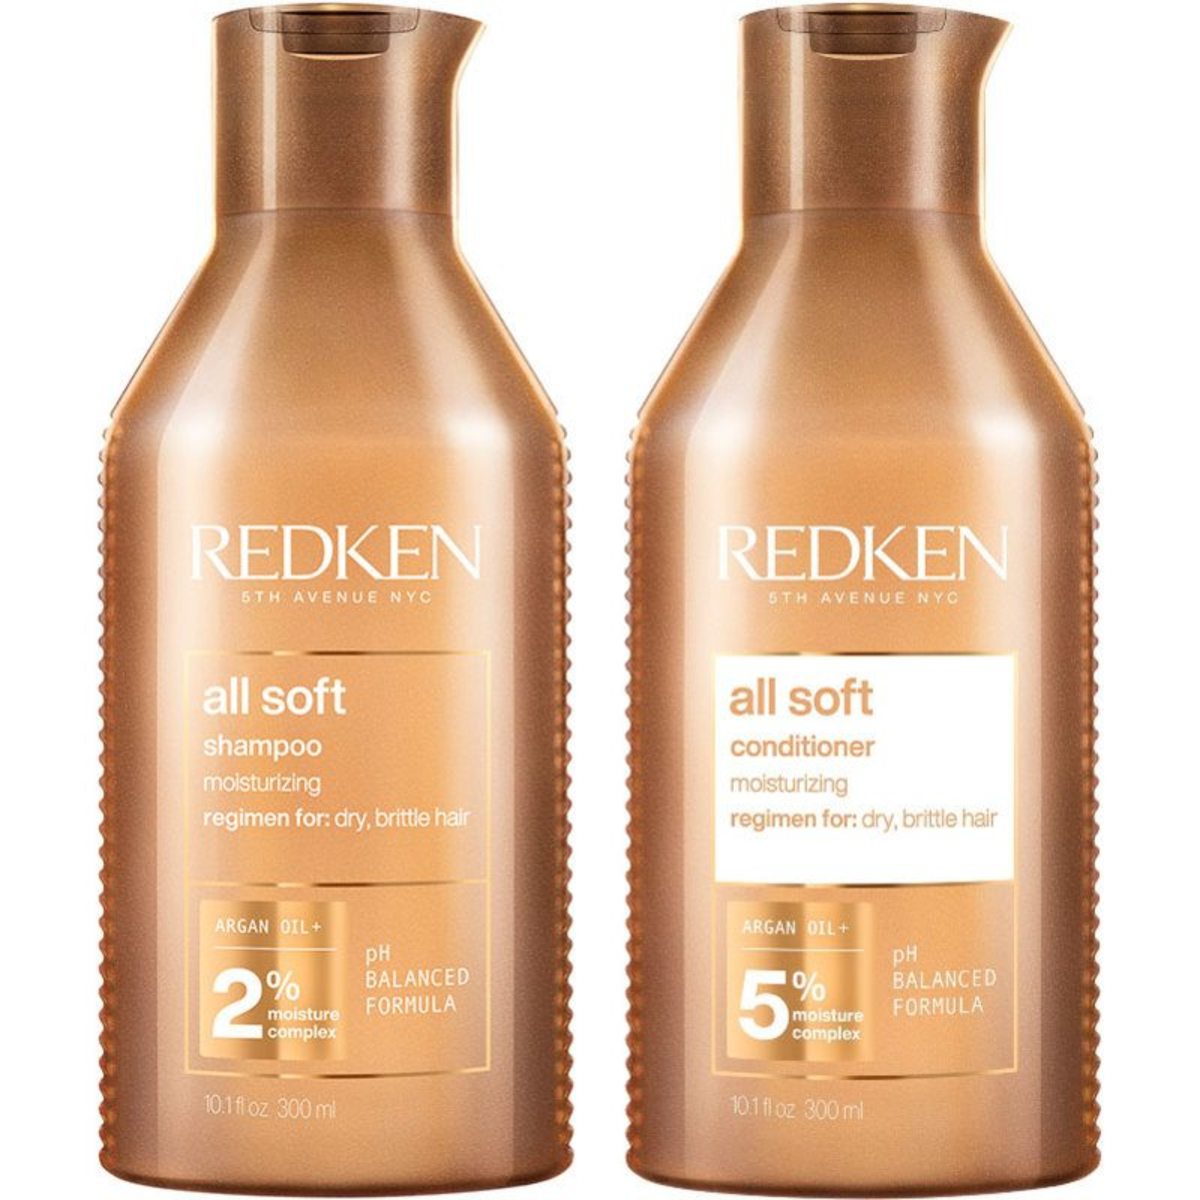 redken-shampoo-the-best-way-to-keep-your-hair-healthy